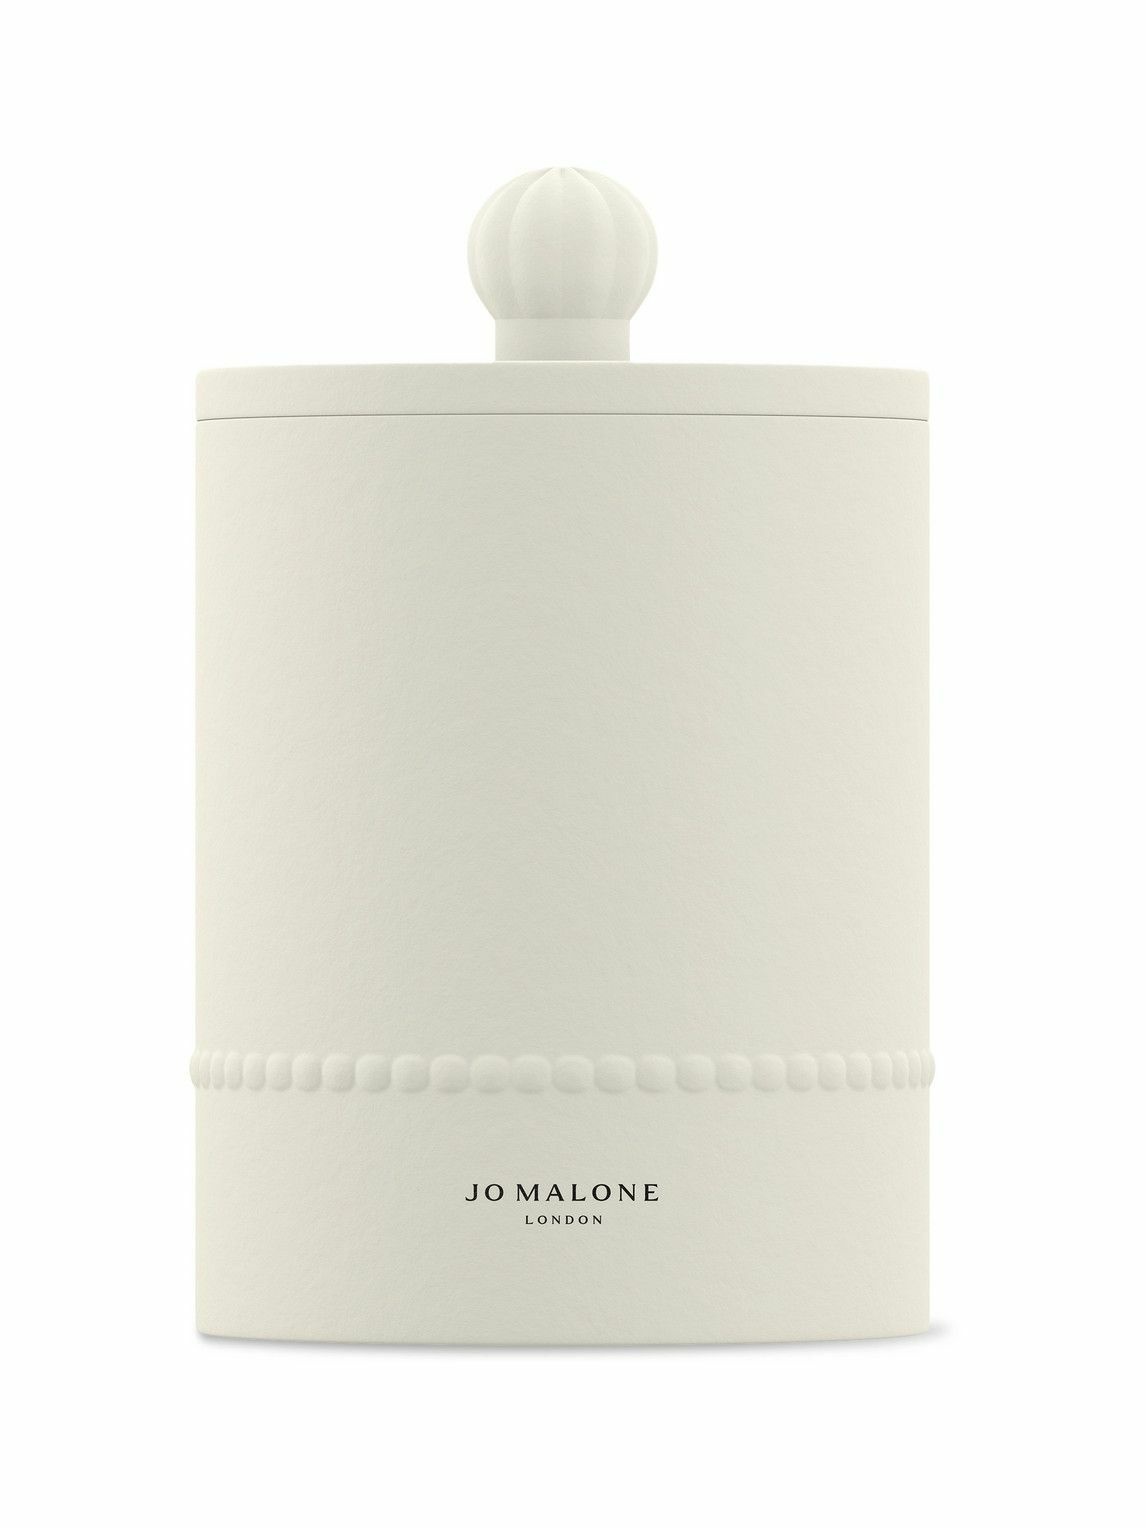 Photo: Jo Malone London - Lilac Lavender & Lovage Scented Candle, 300g